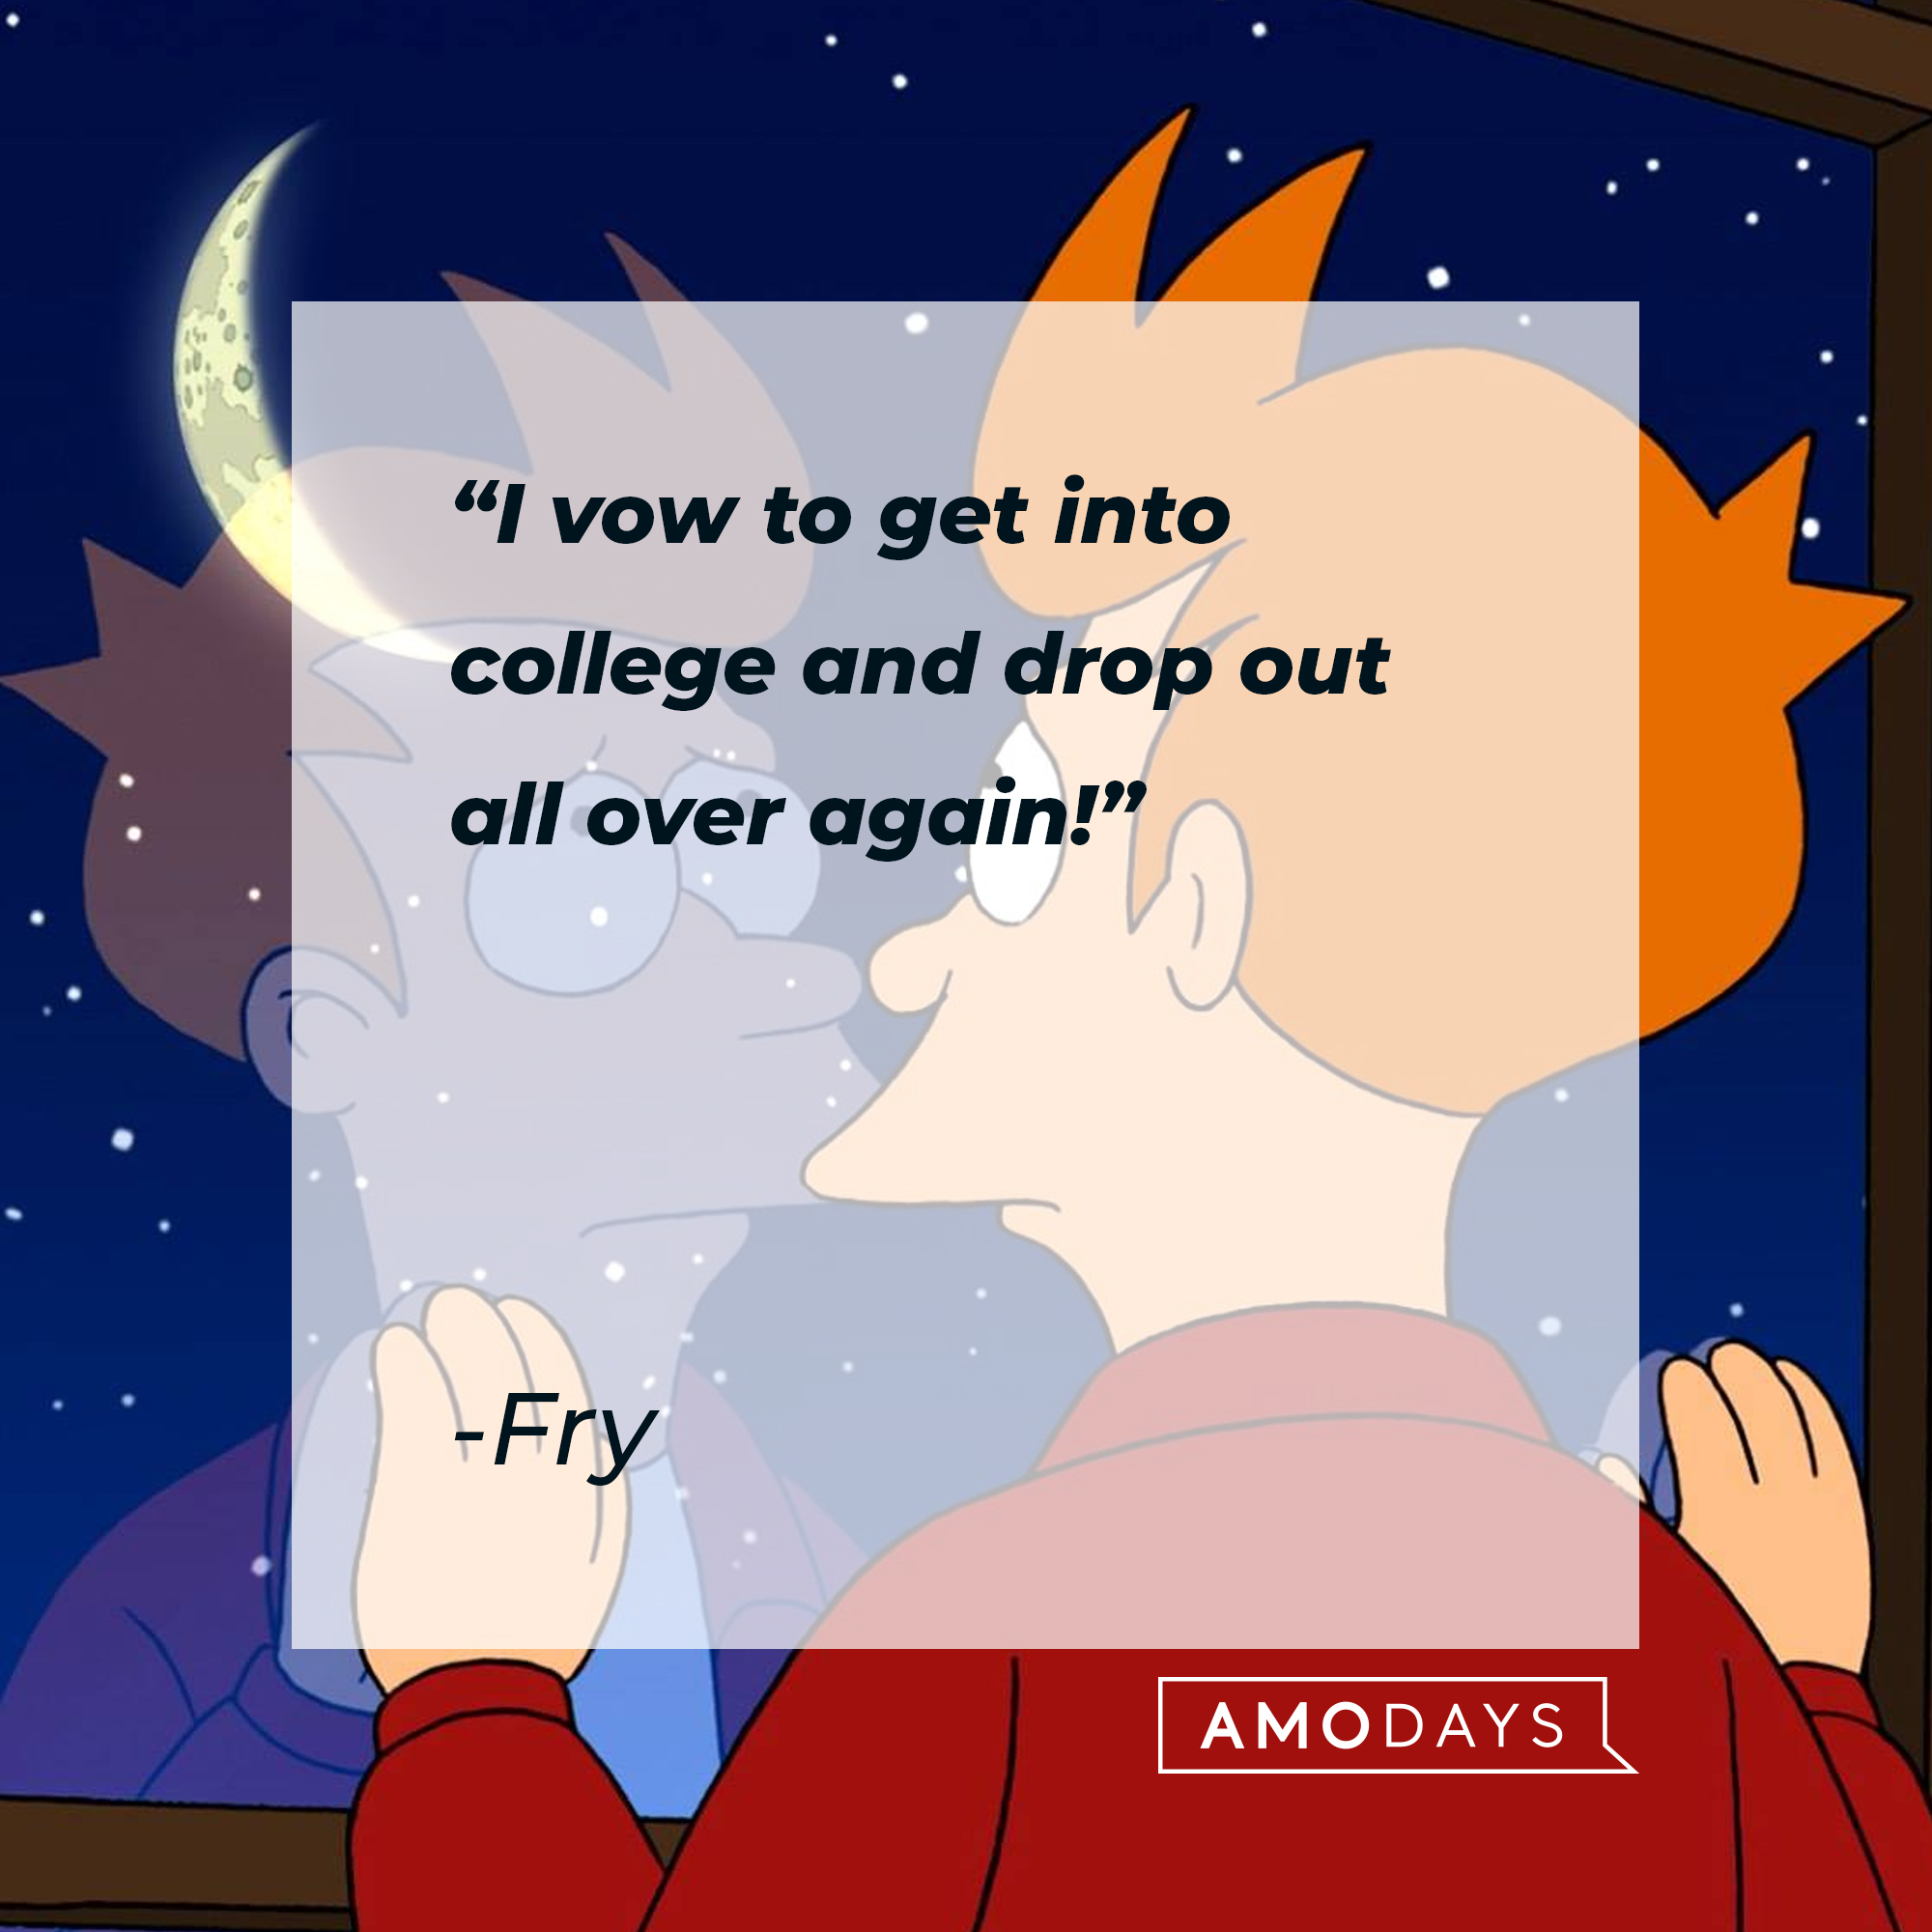 Fry Futurama's quote: "I vow to get into college and drop out all over again!" | Source: Facebook.com/Futurama